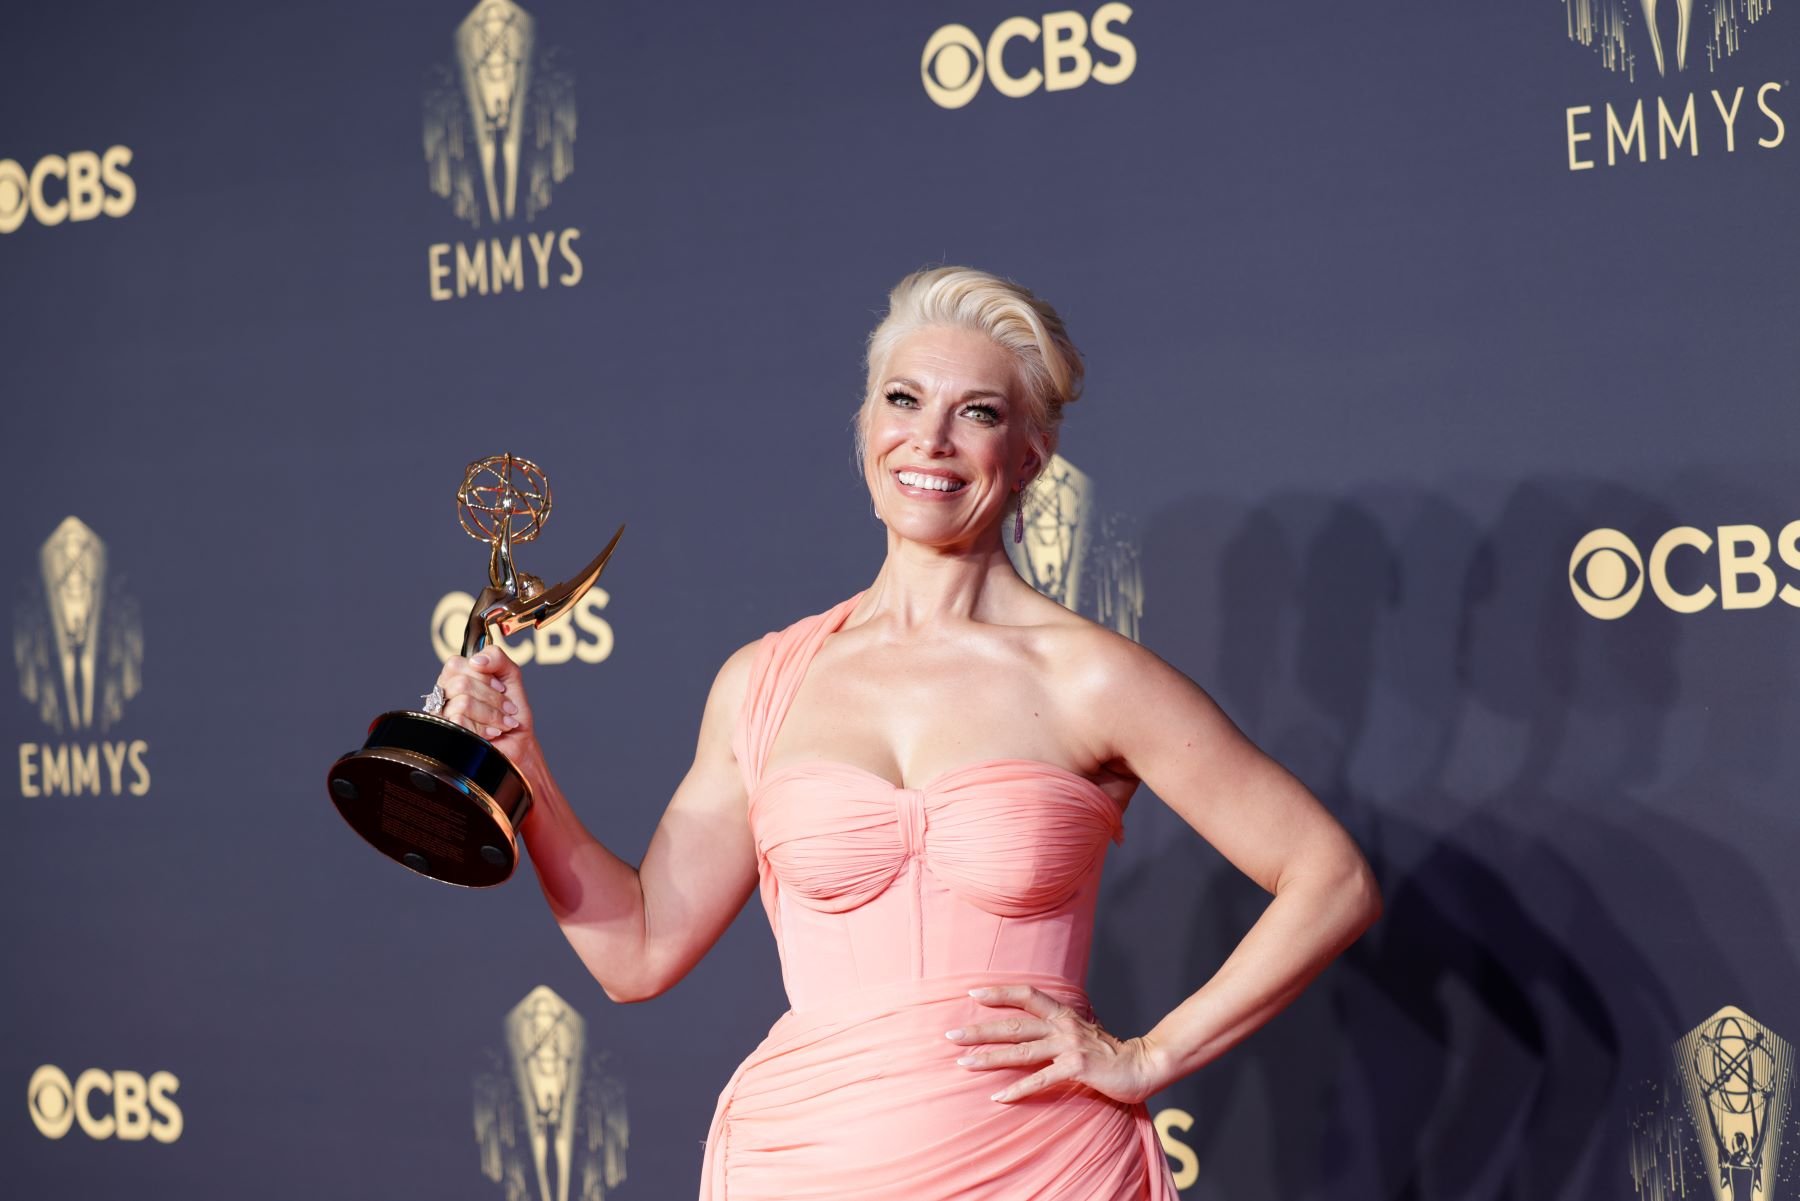 Hannah Waddingham after winning Outstanding Supporting Actress in a Comedy Series at the 73rd Emmy Awards